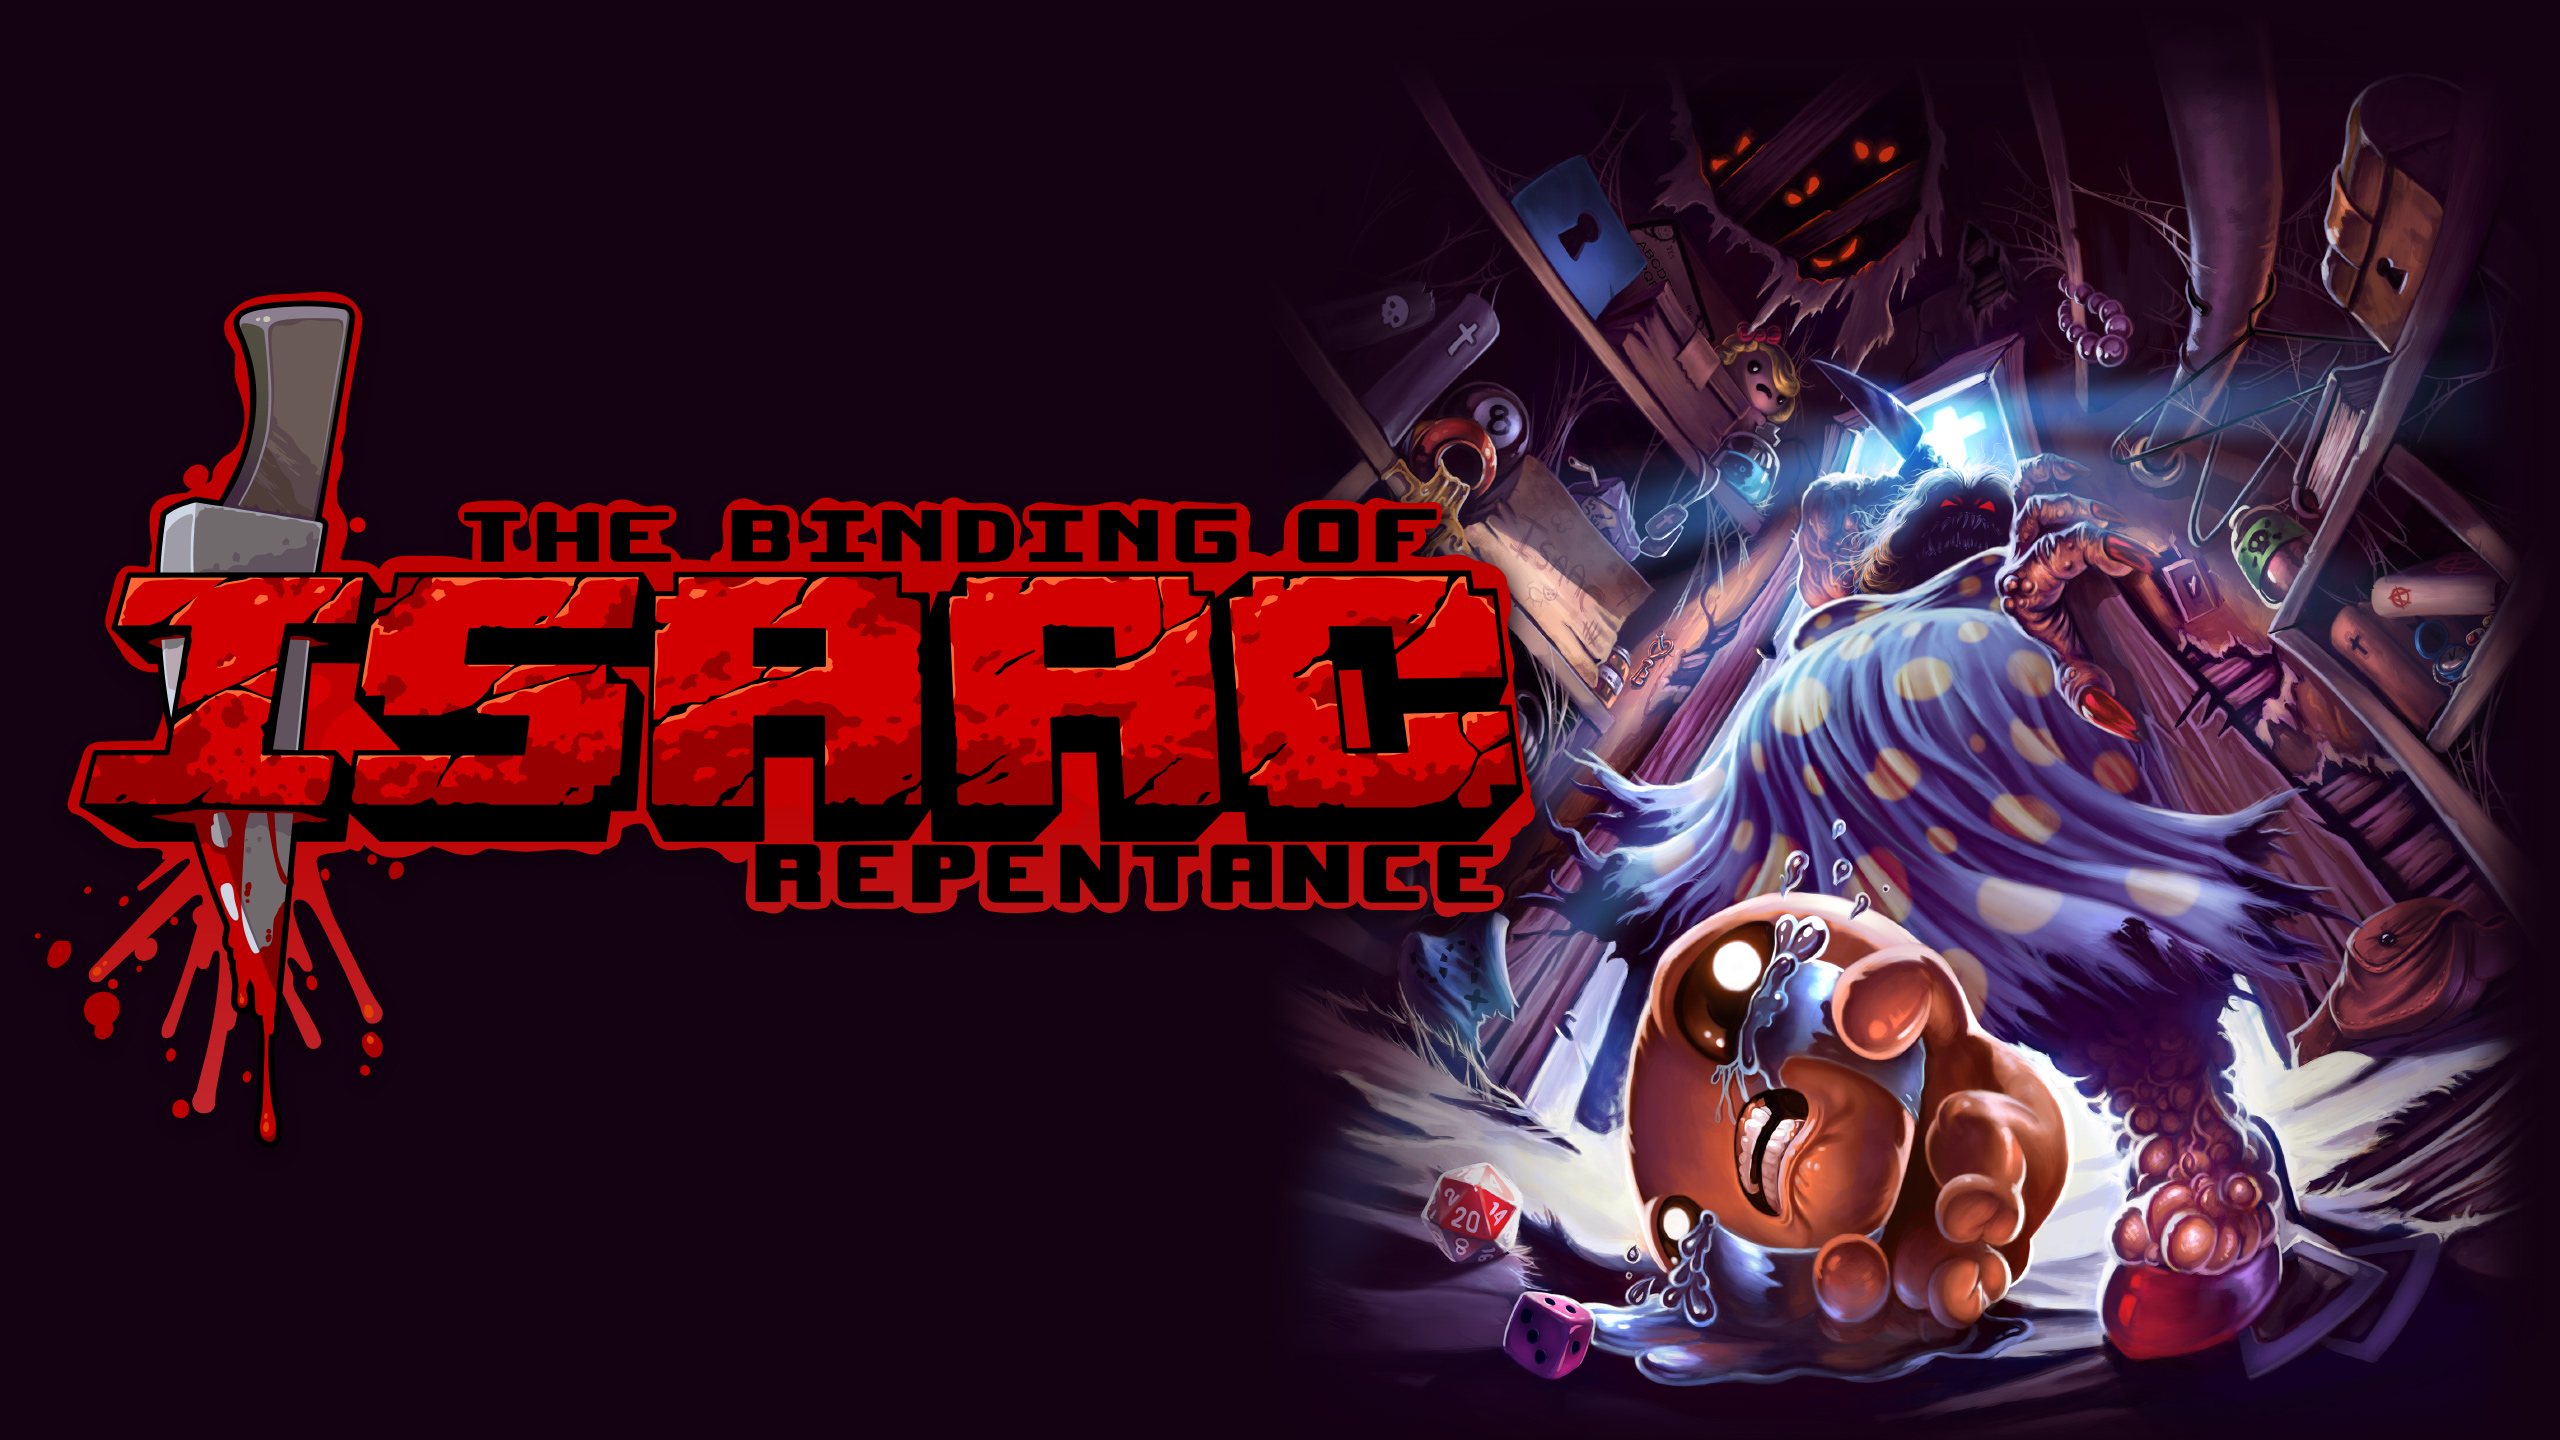 Player's favorite games: The Binding of Isaac